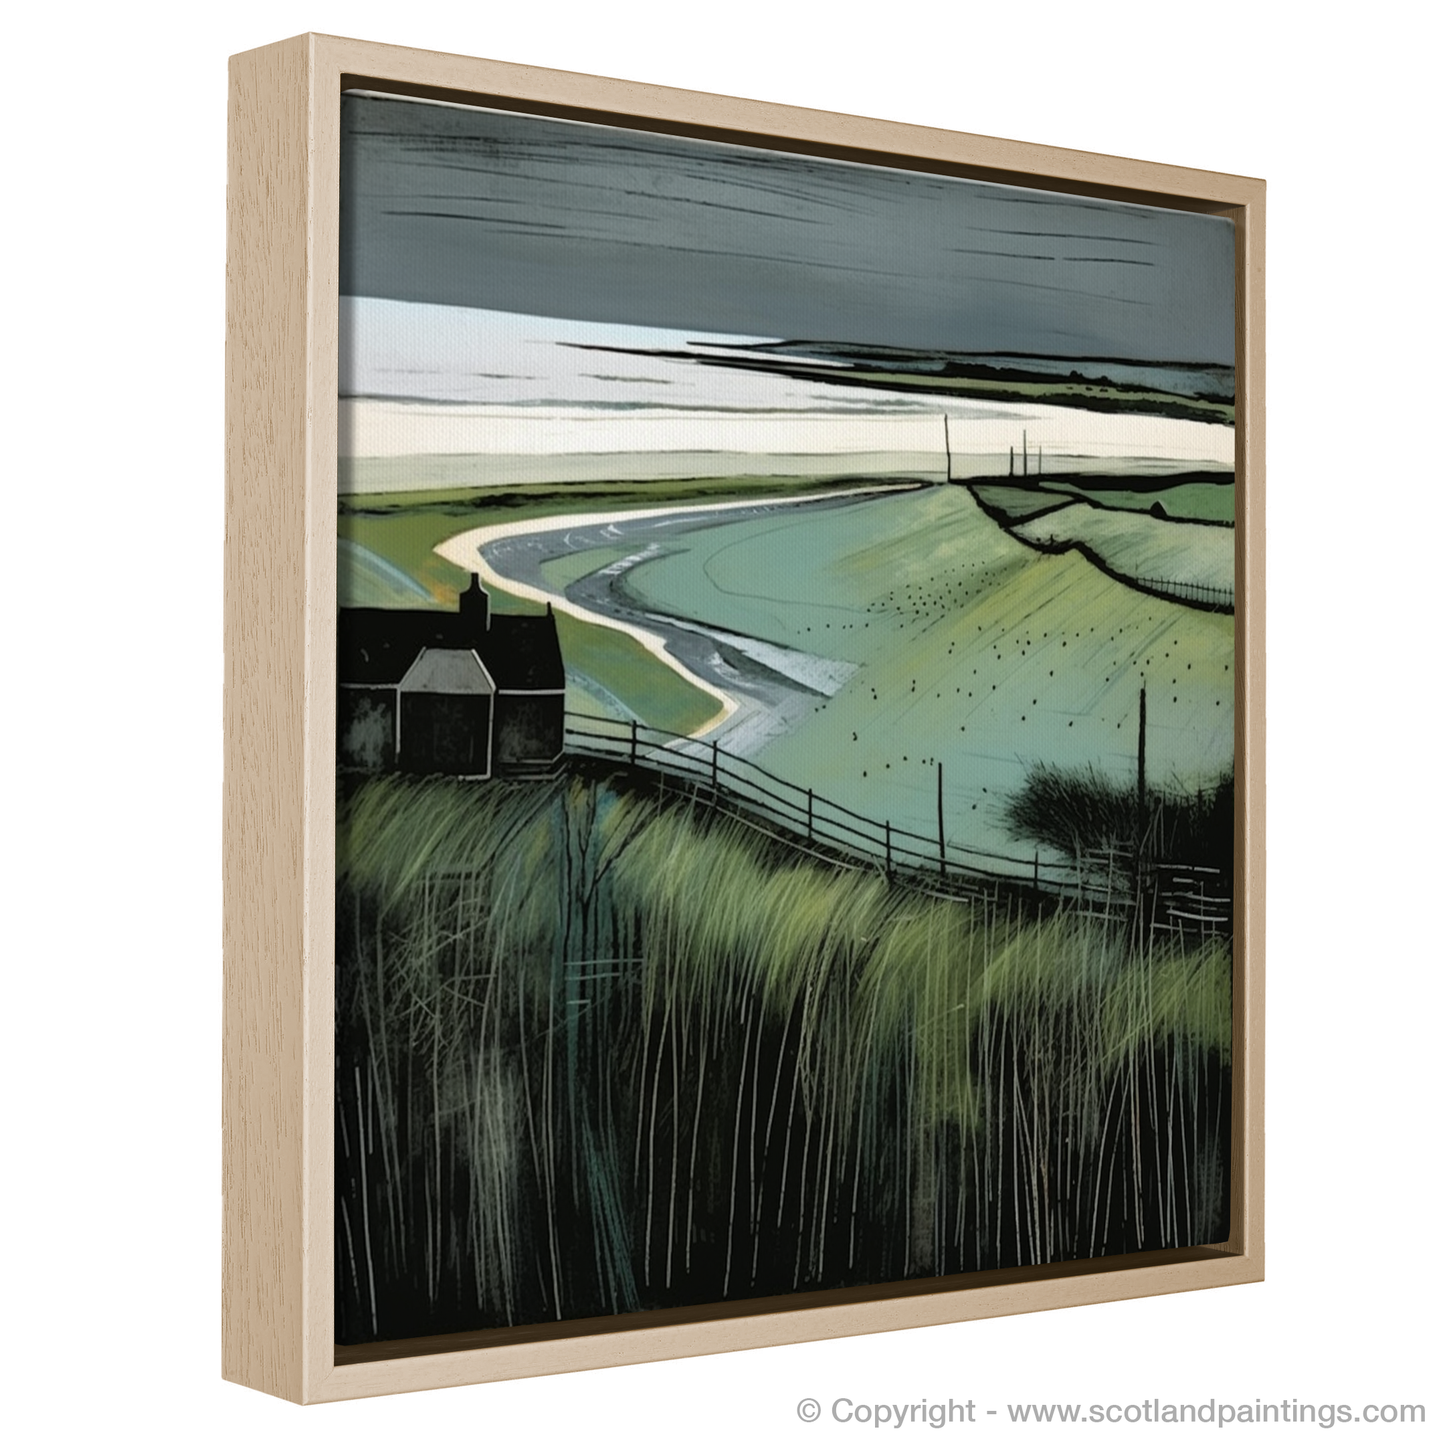 Painting and Art Print of Lunan Bay, Angus entitled "Lunan Bay Unleashed: An Illustrative Expression of Wild Scottish Beauty".